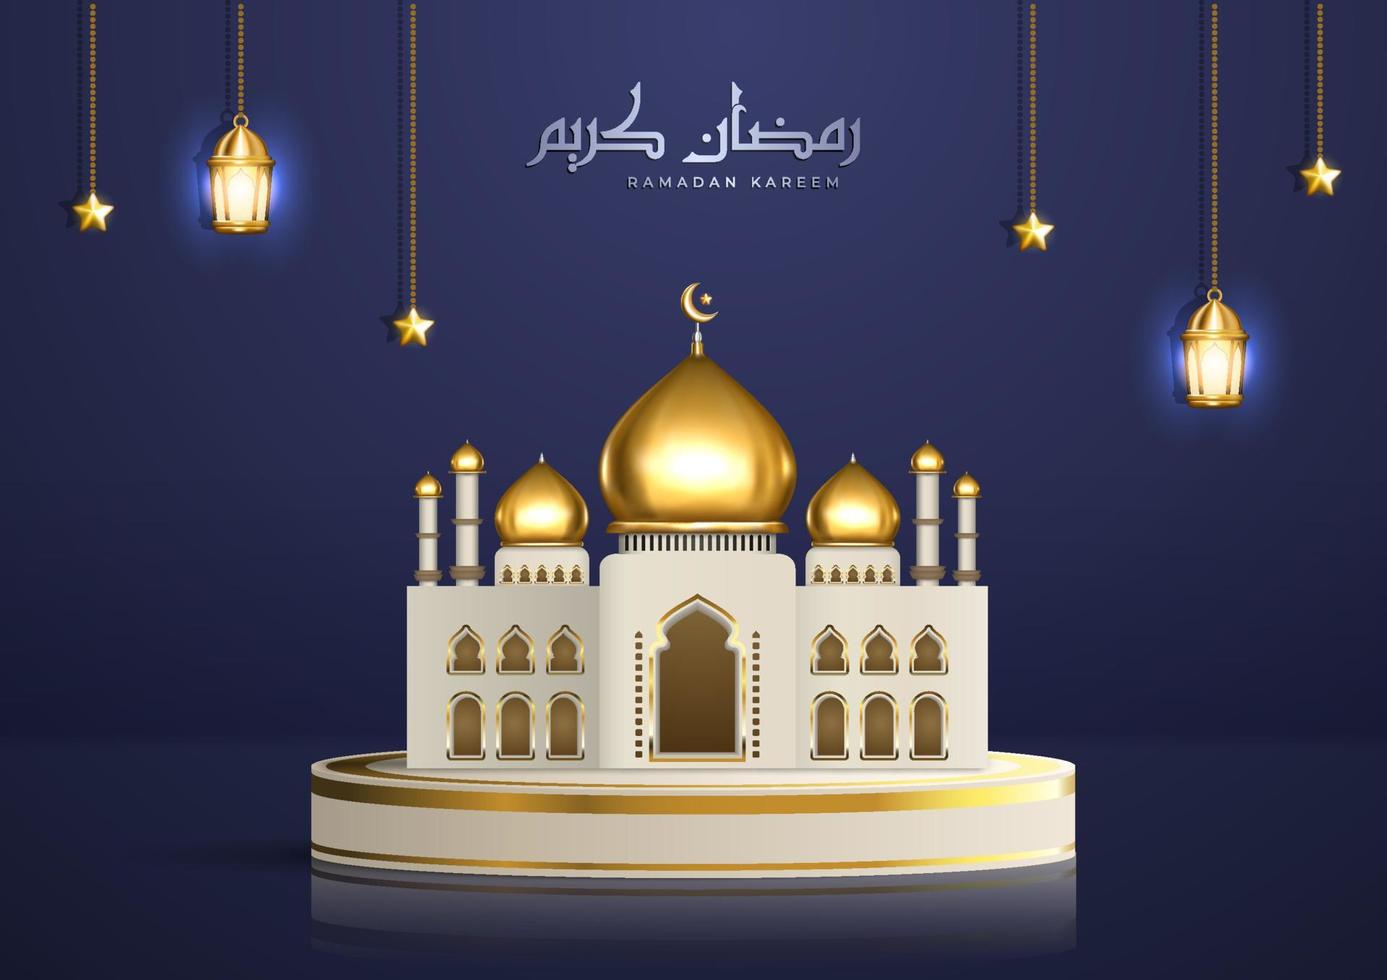 Realistic Islamic illustration with Arabic calligraphy and golden mosque on the product podium. Ramadan Kareem greeting with hanging lanterns and stars vector